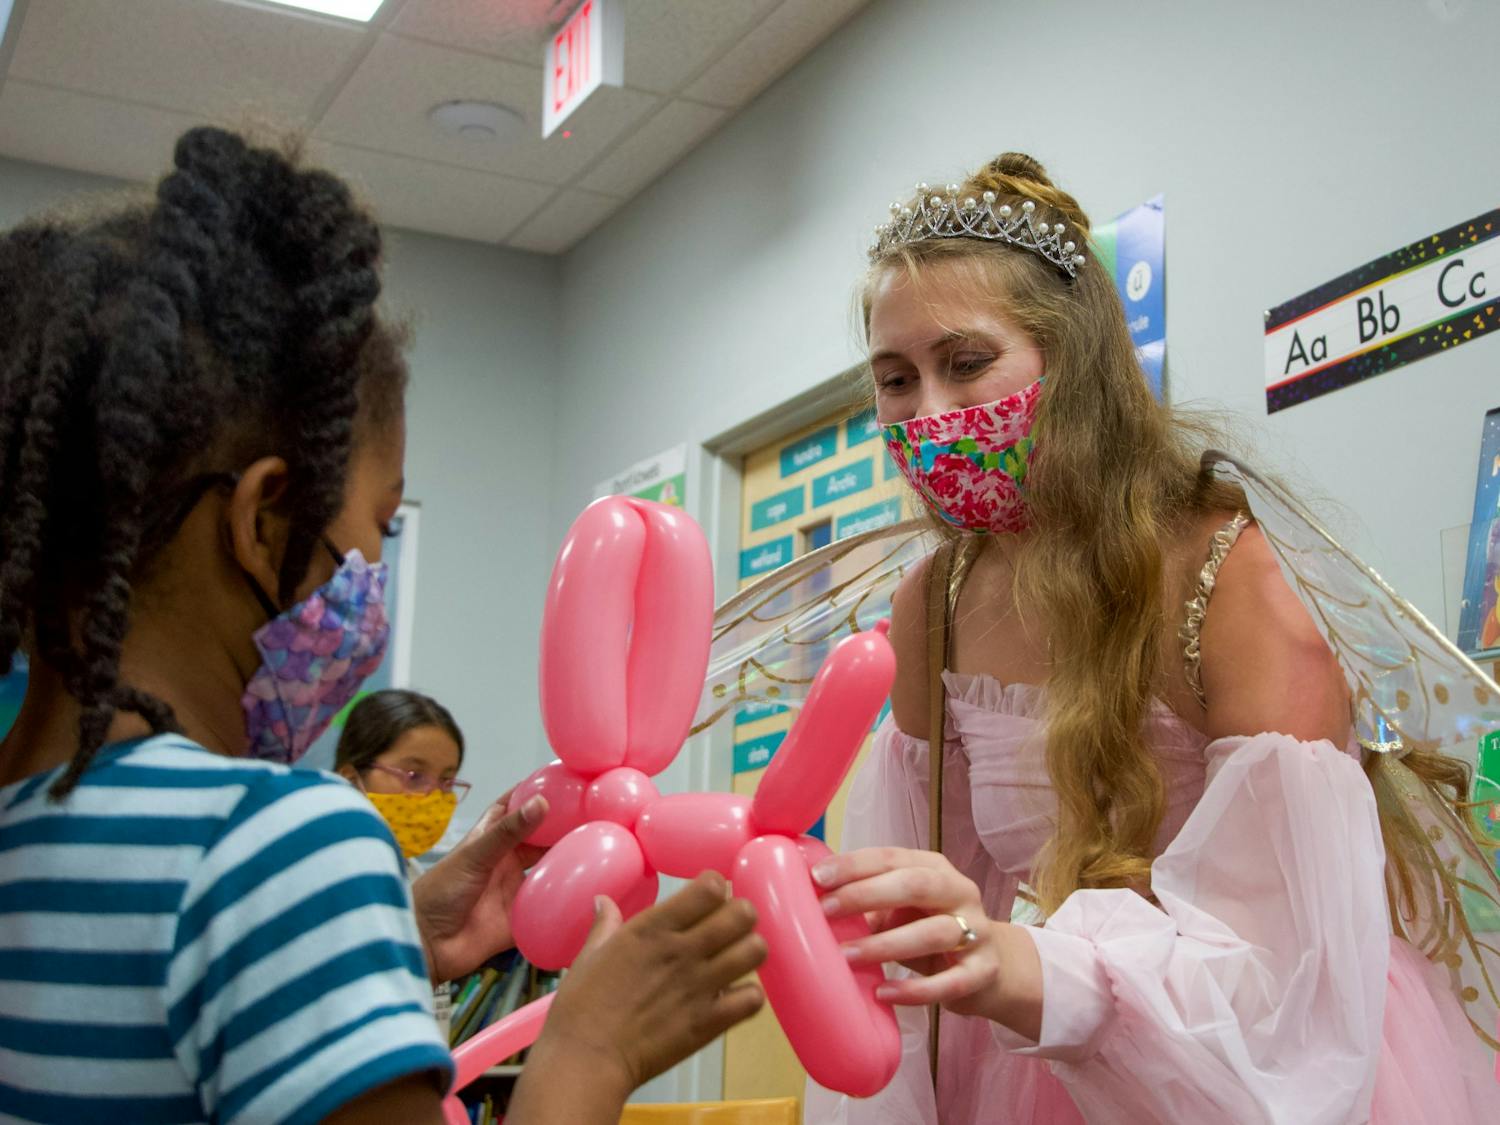 Caroline Jennings, a third-year dental student, dresses as the tooth fairy and makes balloon animals as she volunteers on Wednesday, Oct. 6, 2021, for DEAH day.